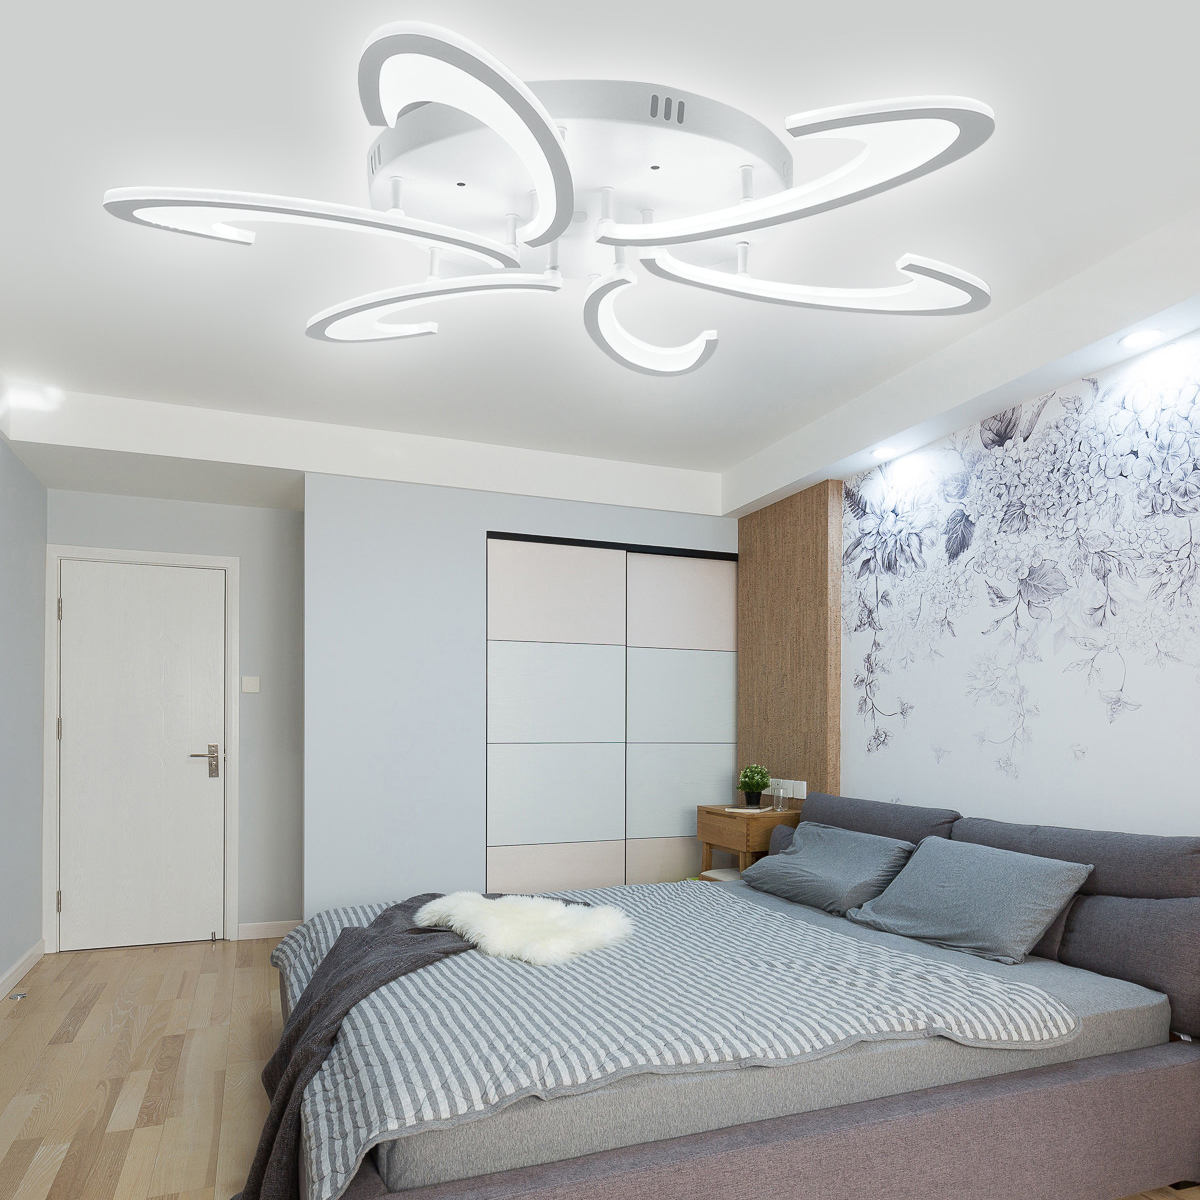 6-Heads-Modern-LED-Acrylic-Ceiling-Lamp-Pendant-Light-Chandeliers-BedroomRemote-Control-1793884-4